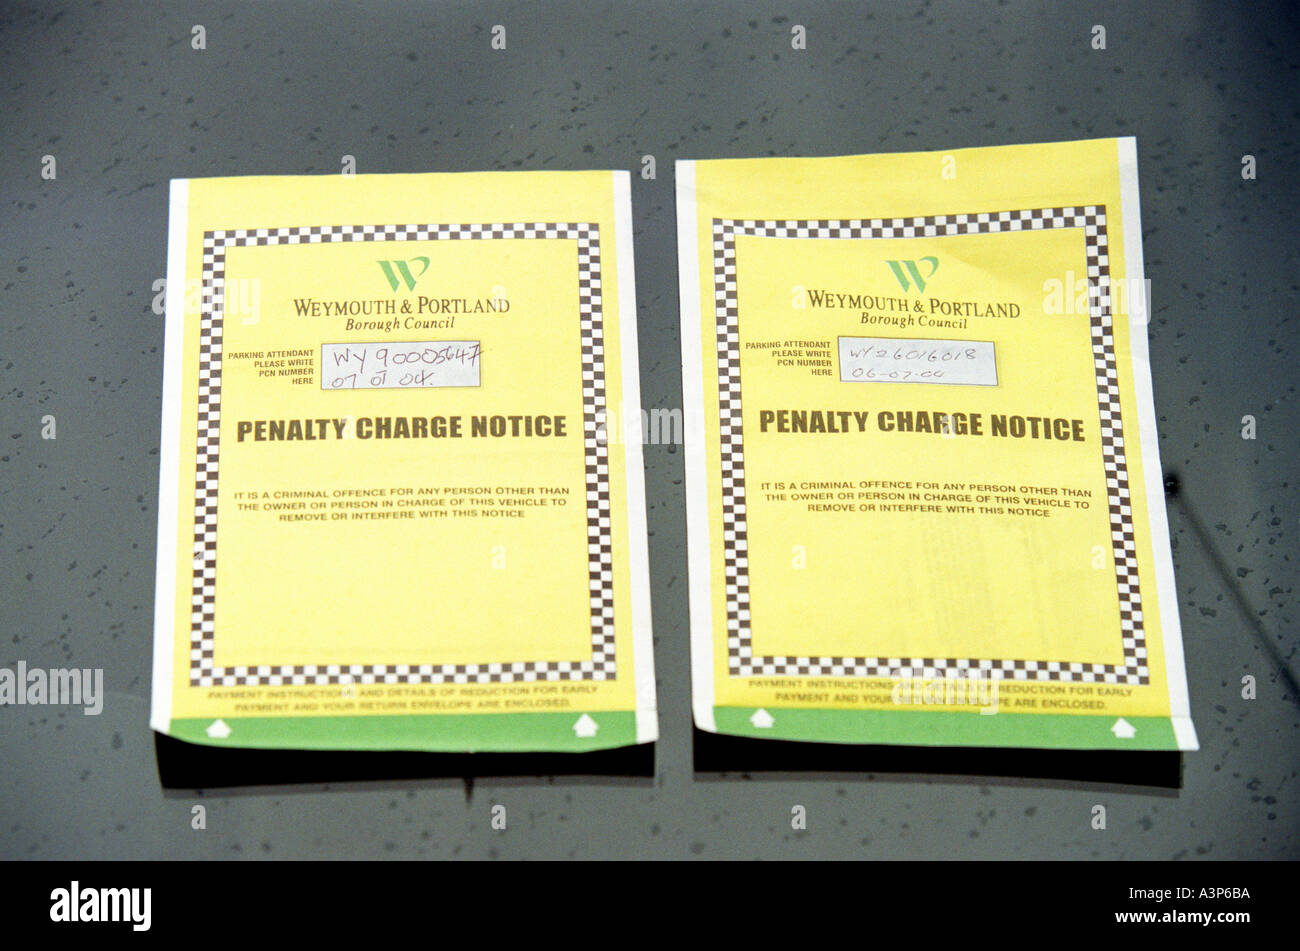 Two parking tickets on a car windscreen in Britain UK Stock Photo